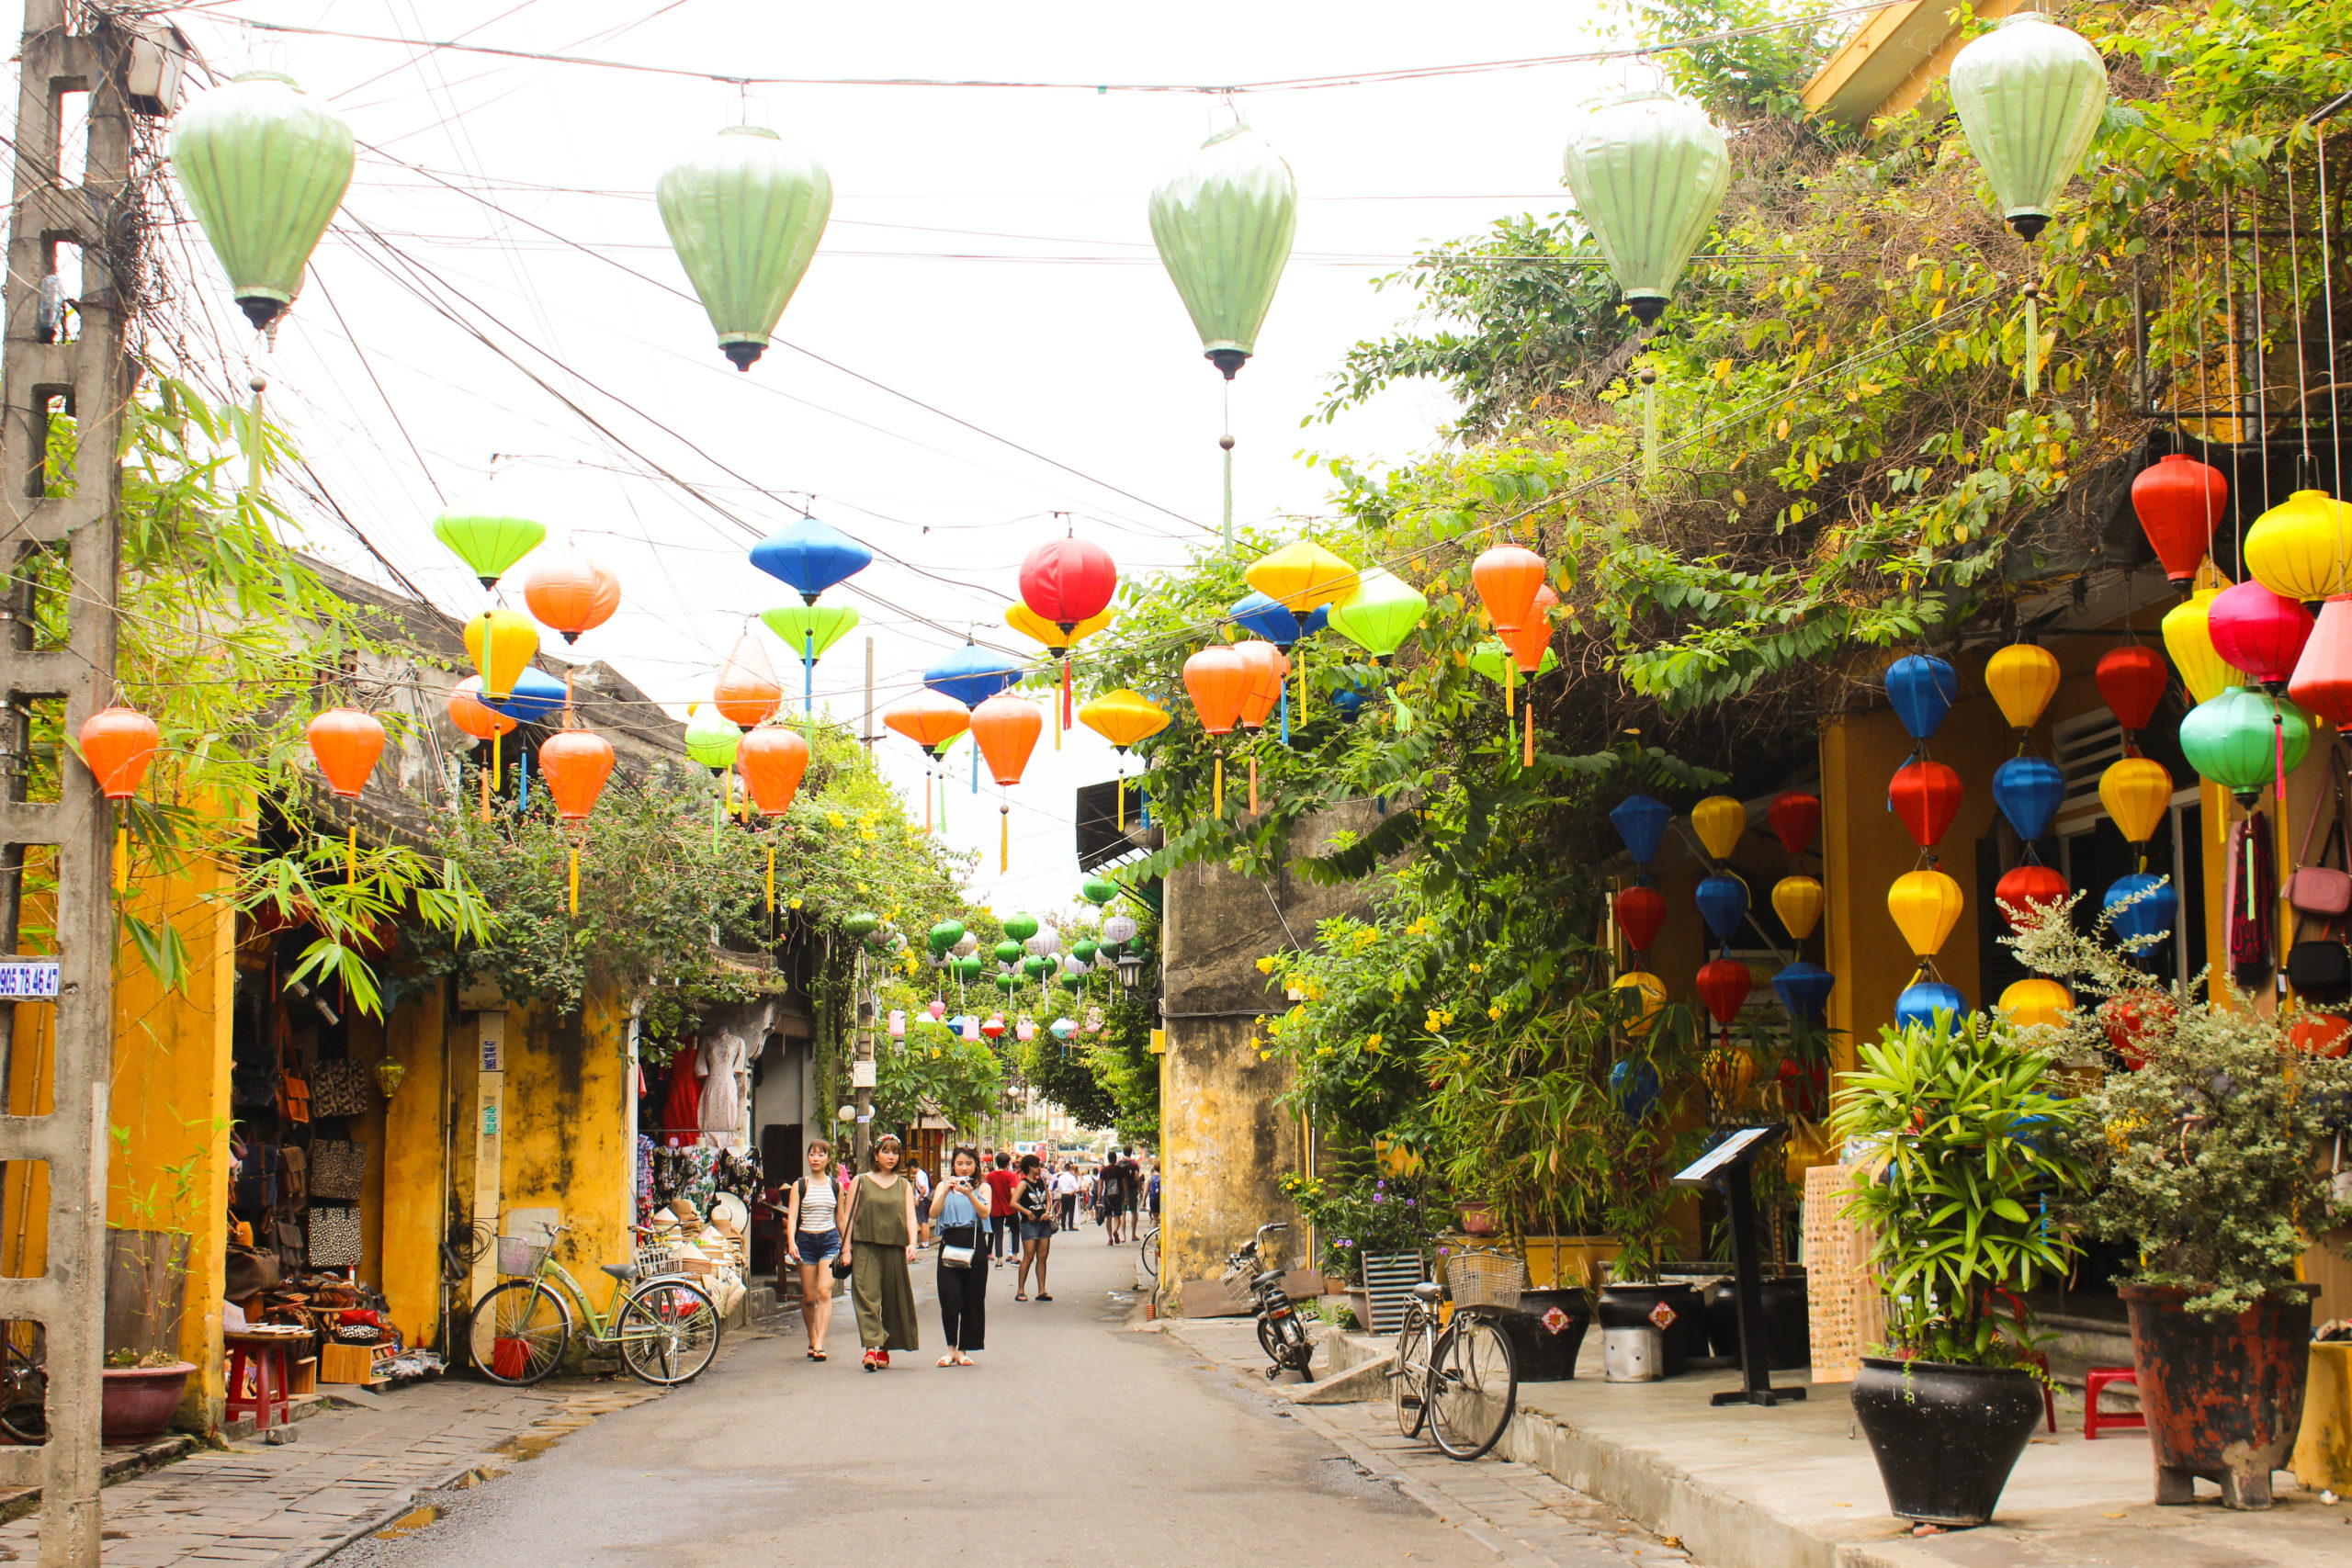 5 tips to enjoy Hoi An at its best